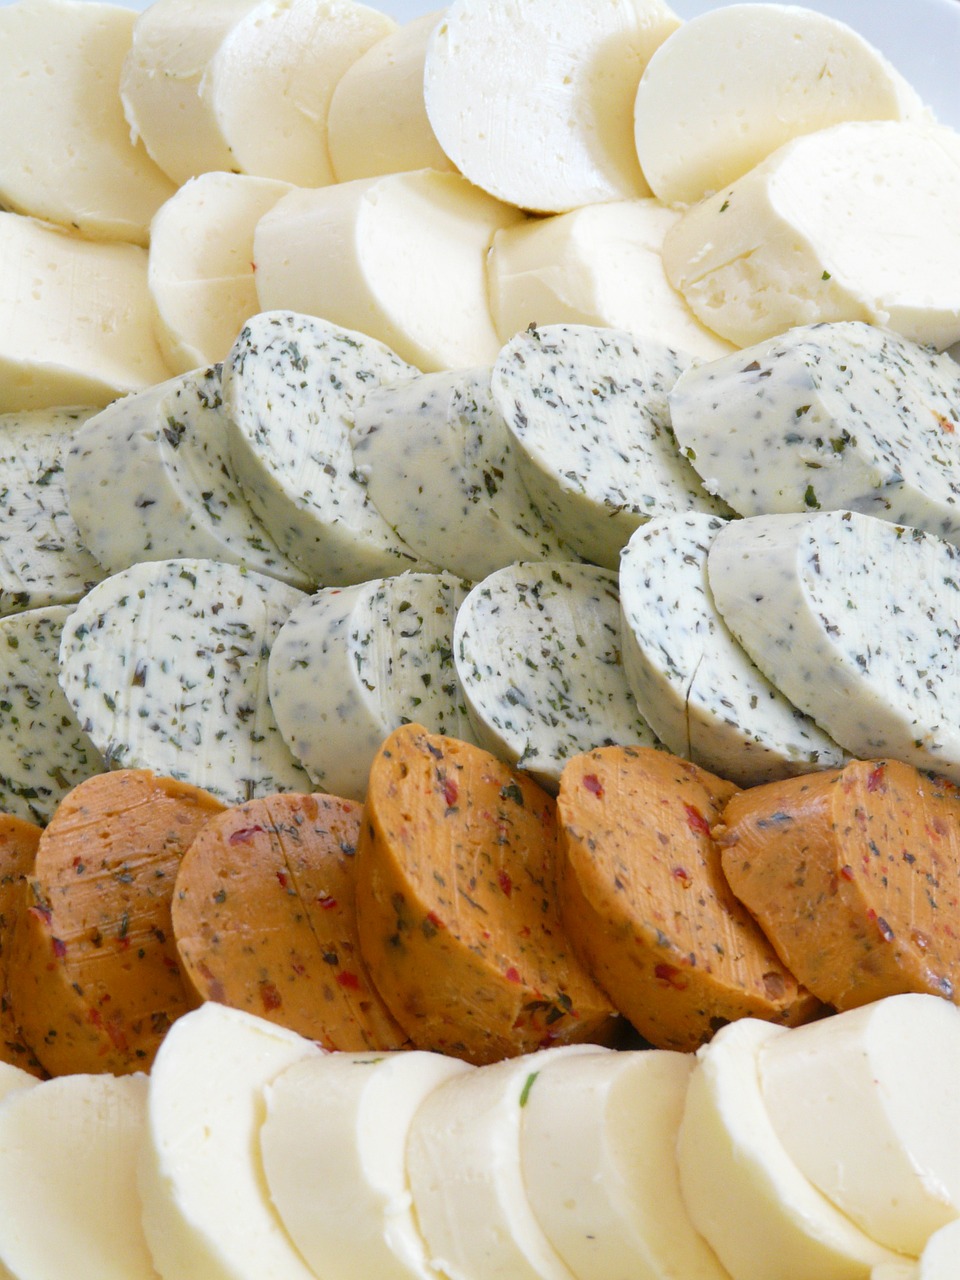 Holiday Cheese Spread